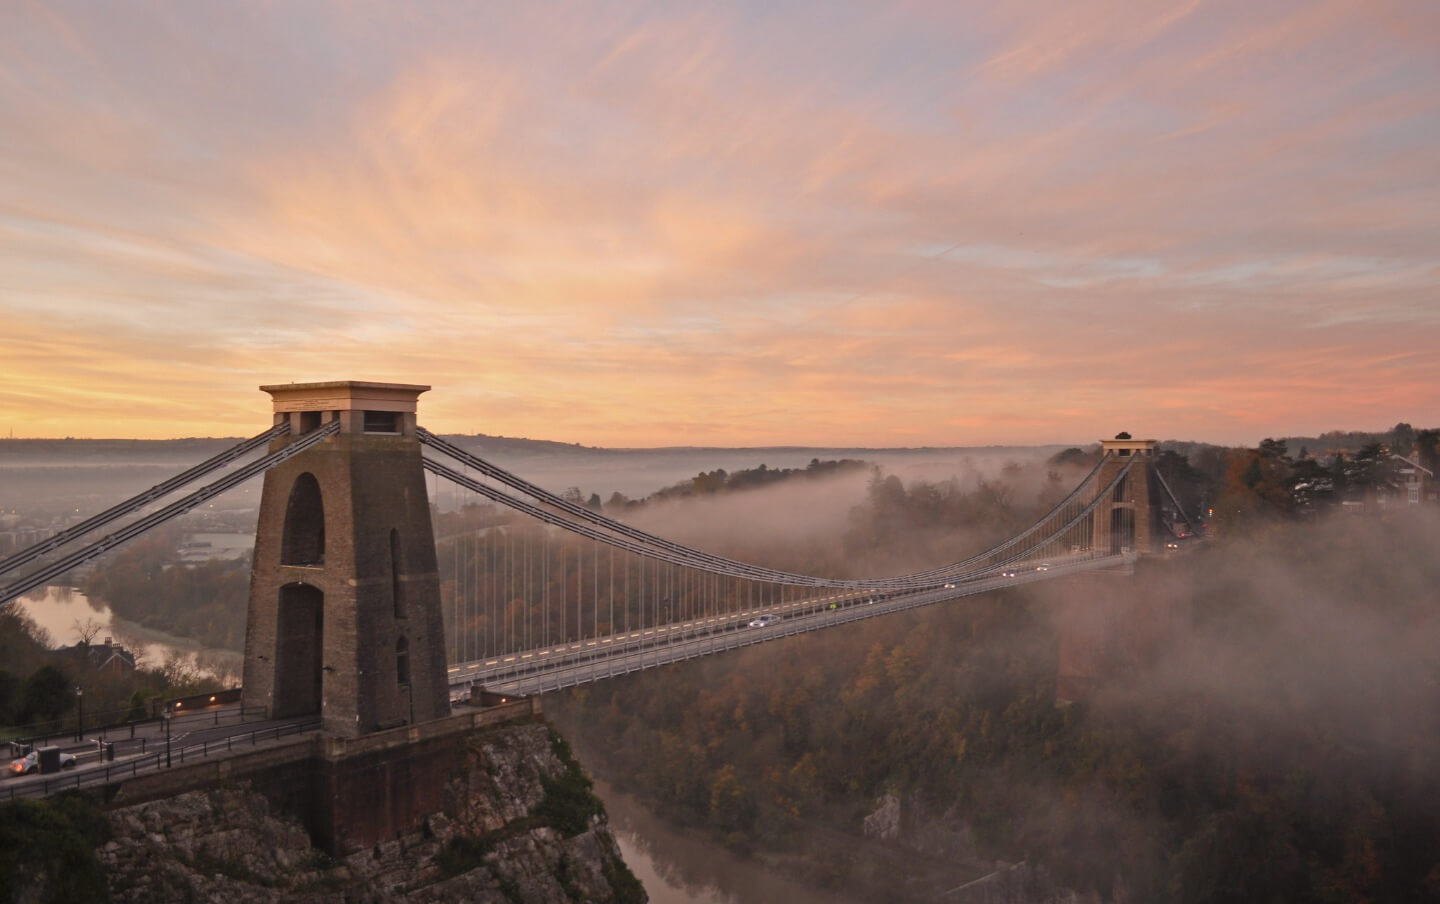 Student Accommodation in Clifton, Bristol - the Clifton Suspension Bridge on a cloudy day